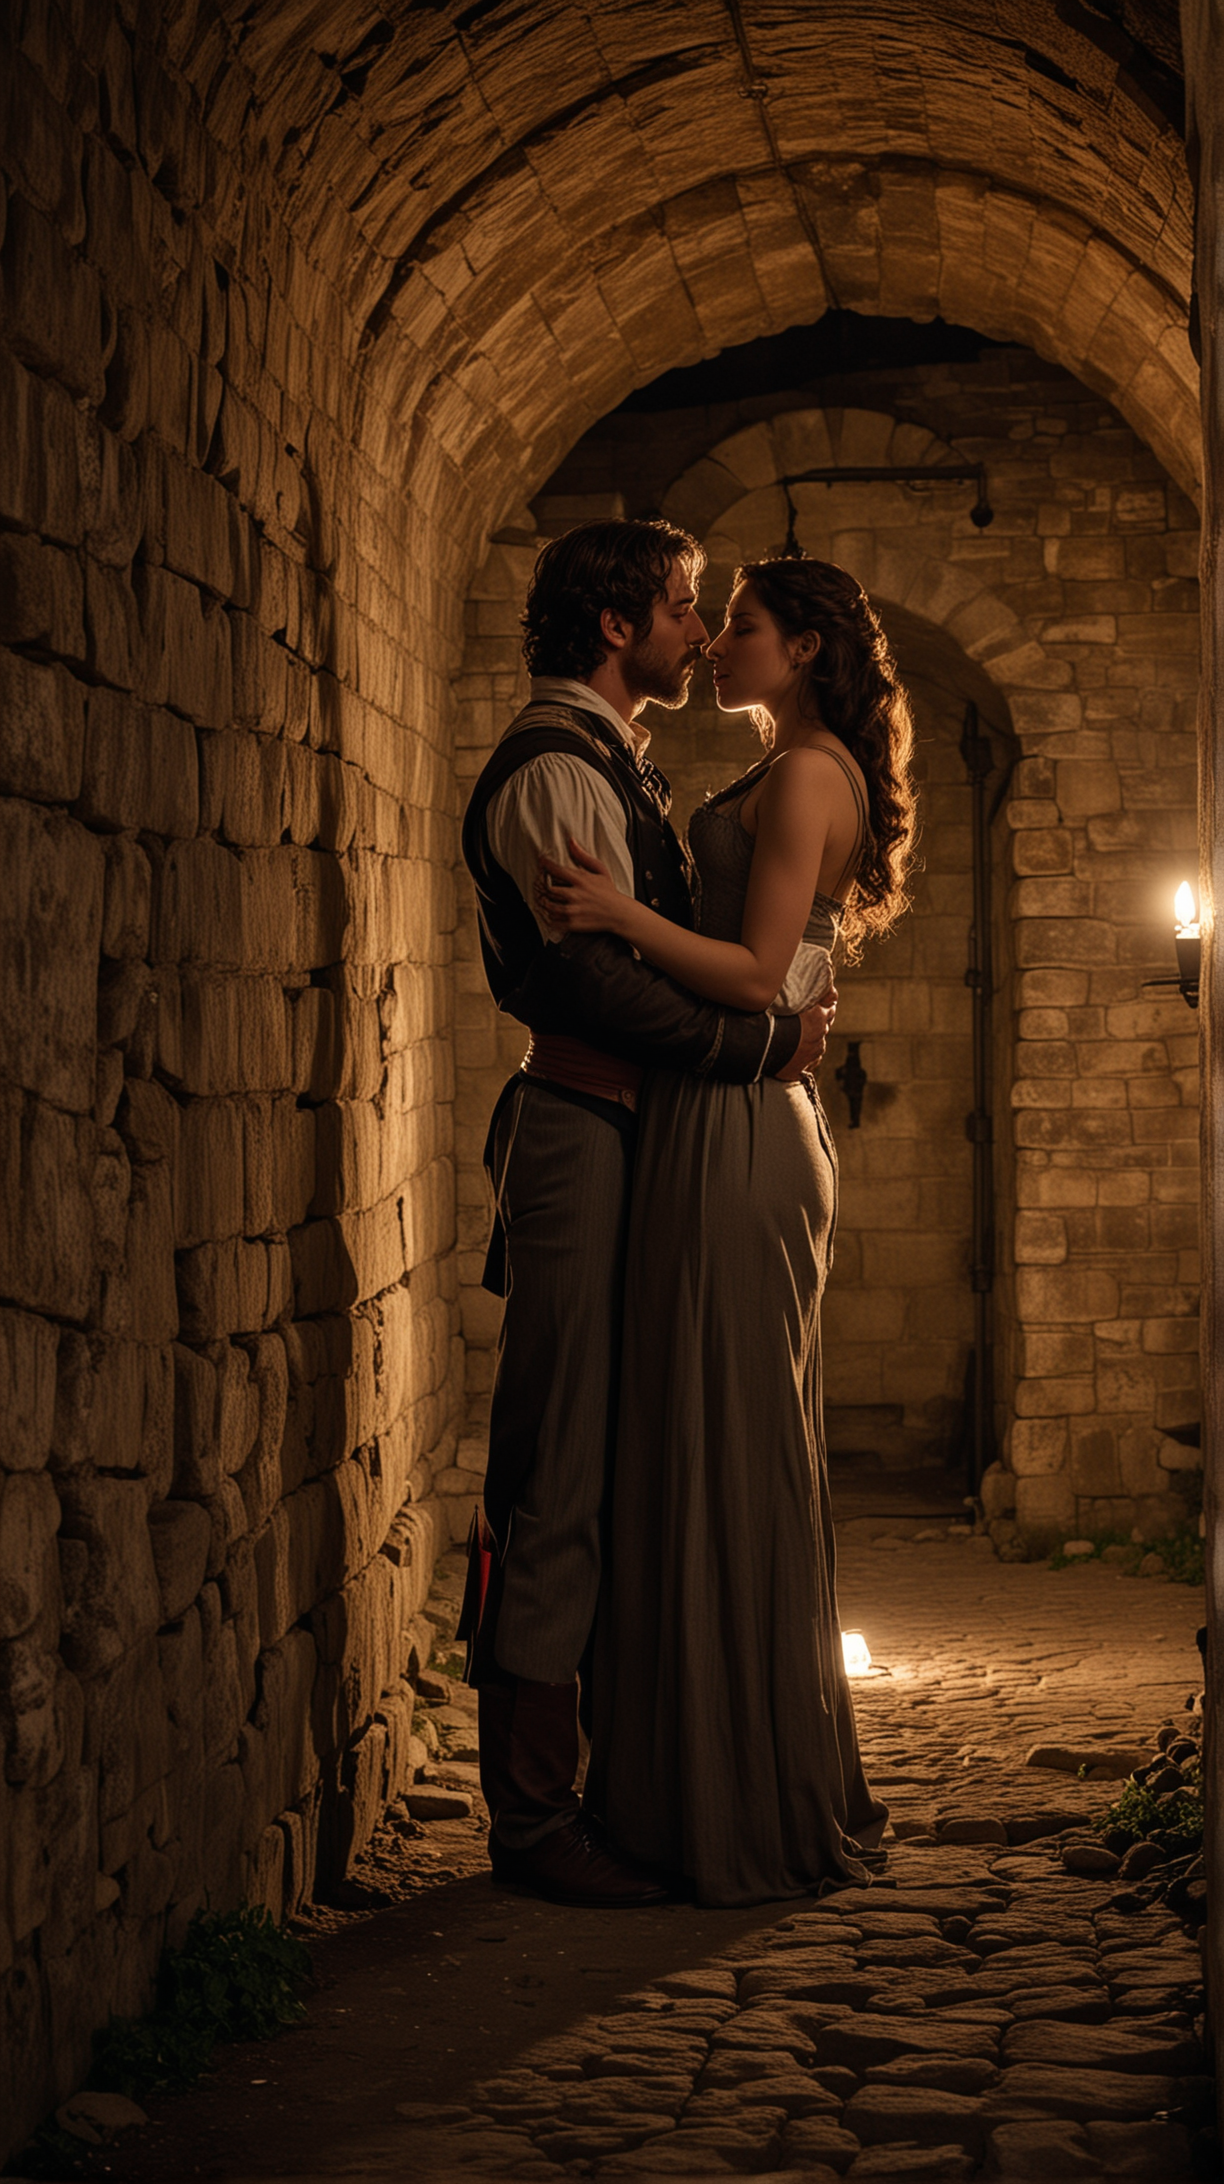 In an 18th-century European underground dungeon, a scene unfolds where a well-dressed woman and a man engage in a consensual, intimate moment. She kisses the man with affection, as they stand amidst the historical setting of stone walls and dim torchlight. The atmosphere is one of mutual respect and intrigue, capturing a moment of private connection in a bygone era.